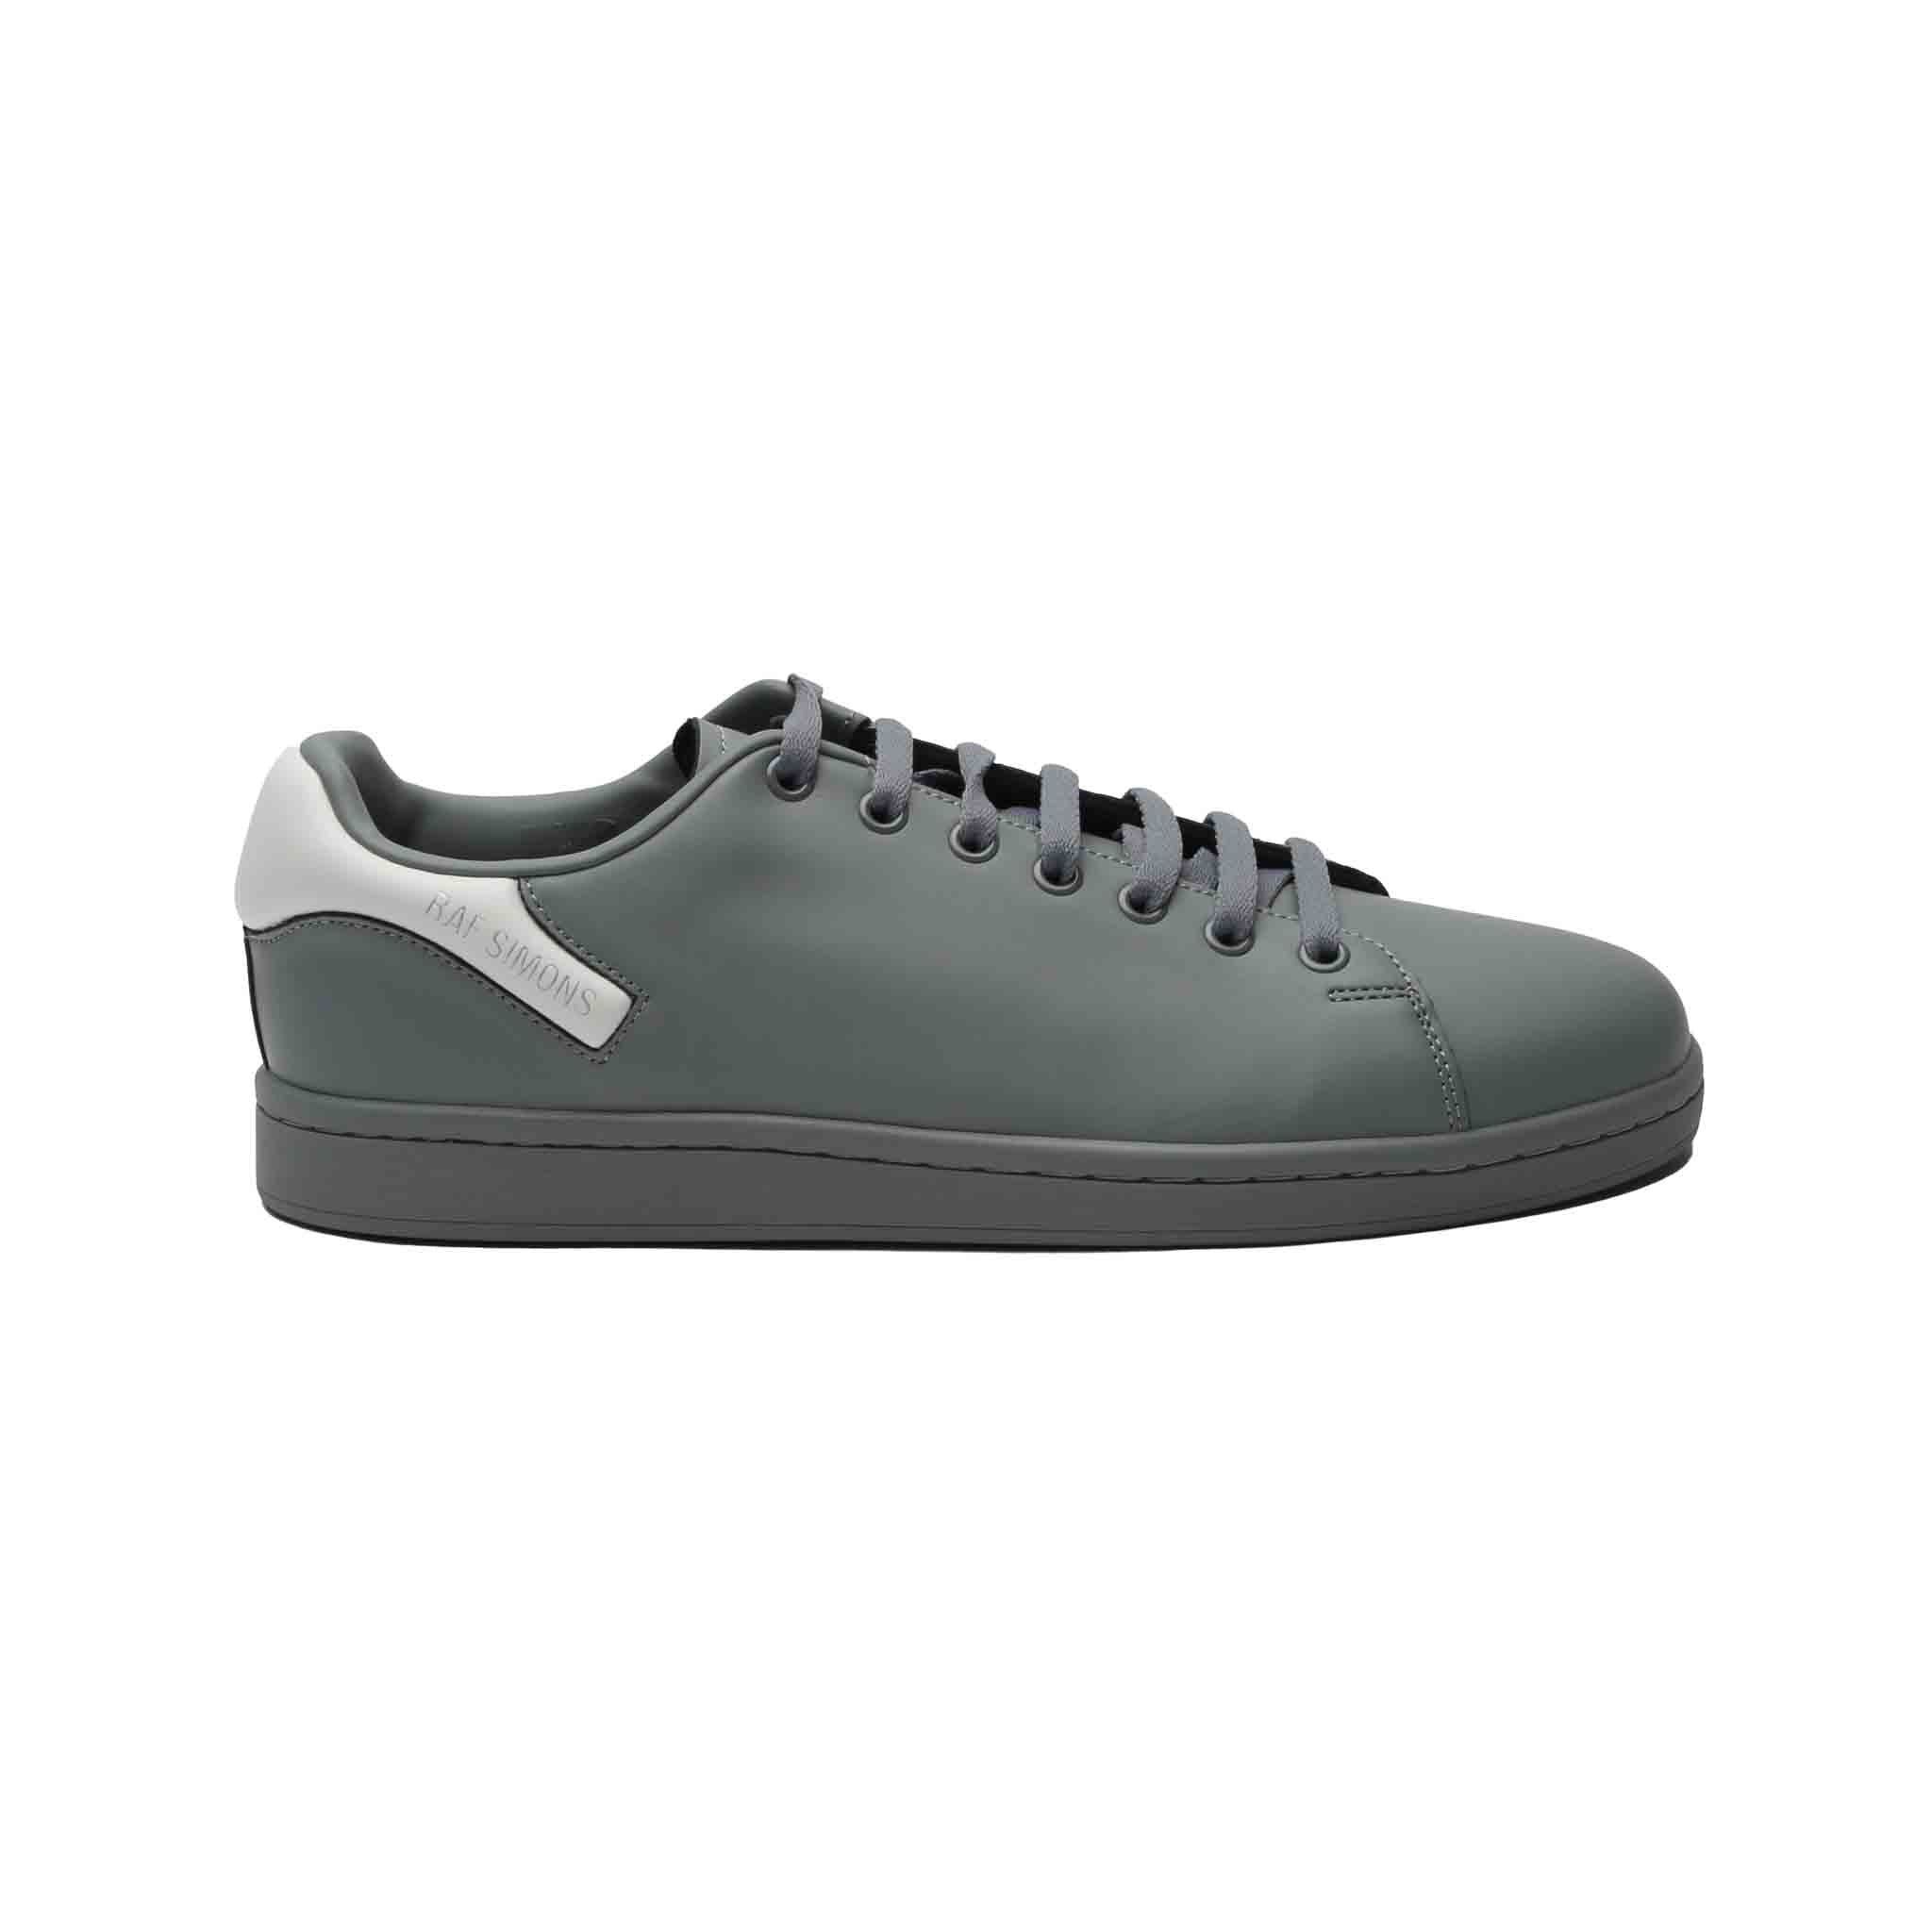 Orion trainers are modelled after classic tennis styles. Made from smooth faux leather and detailed with the brand's lettering across the contrasting heel padding and inner sole.   Product Info:  Laces Round toe Padded heel Small logo detailing Style Code: HR760001S 0320